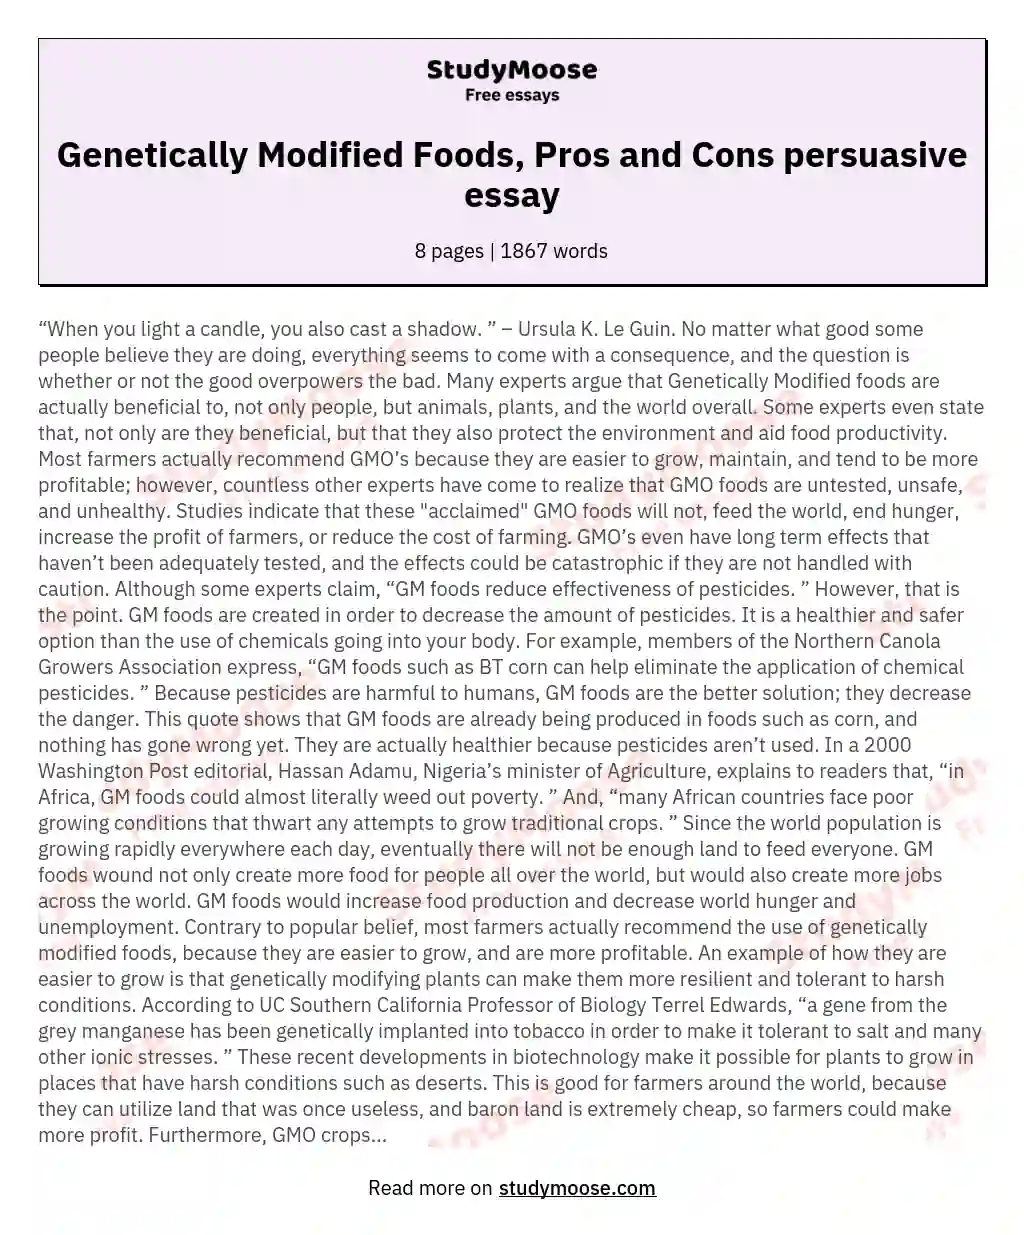 write a thesis statement for your argument genetically modified foods